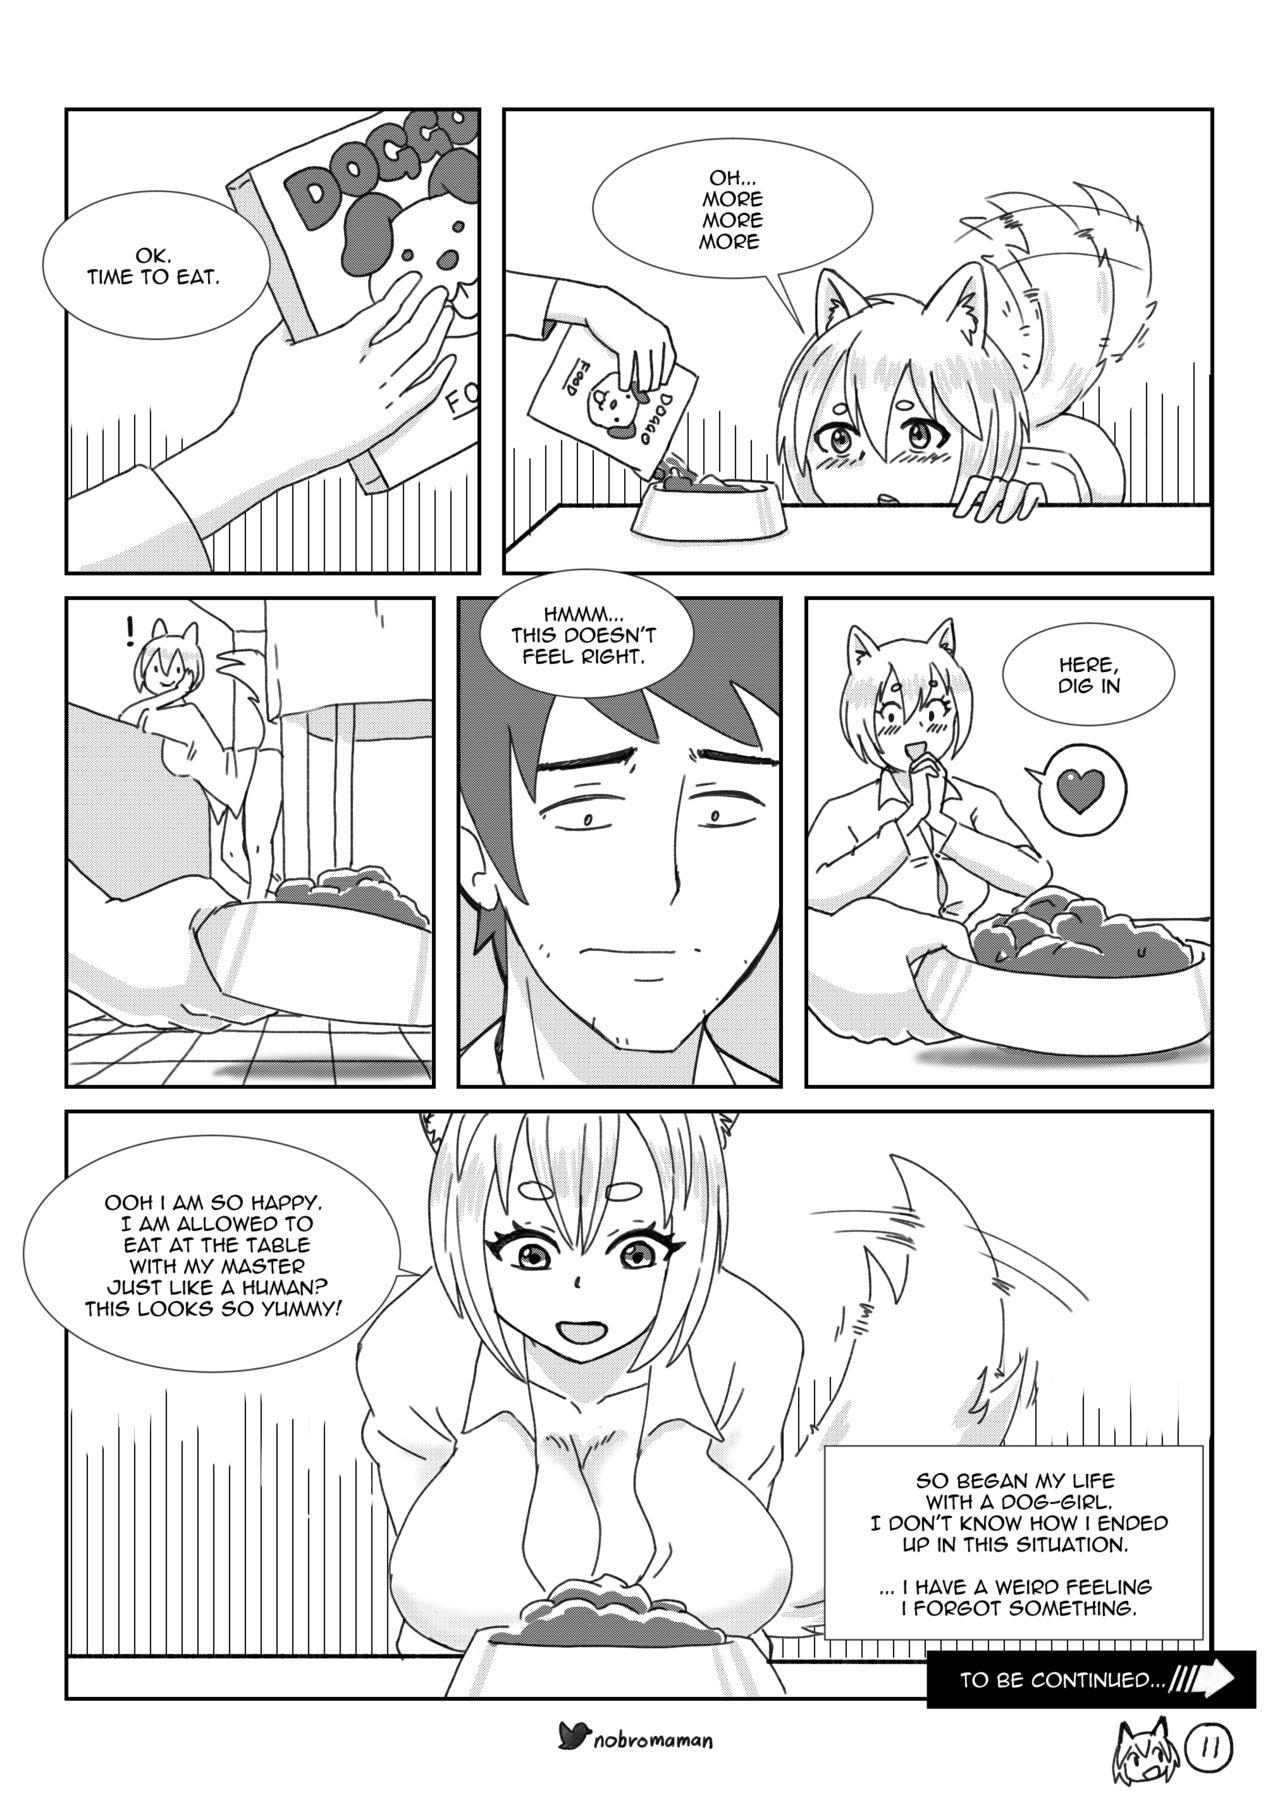 Monster Life with a dog girl - Chapter1 Con - Page 12